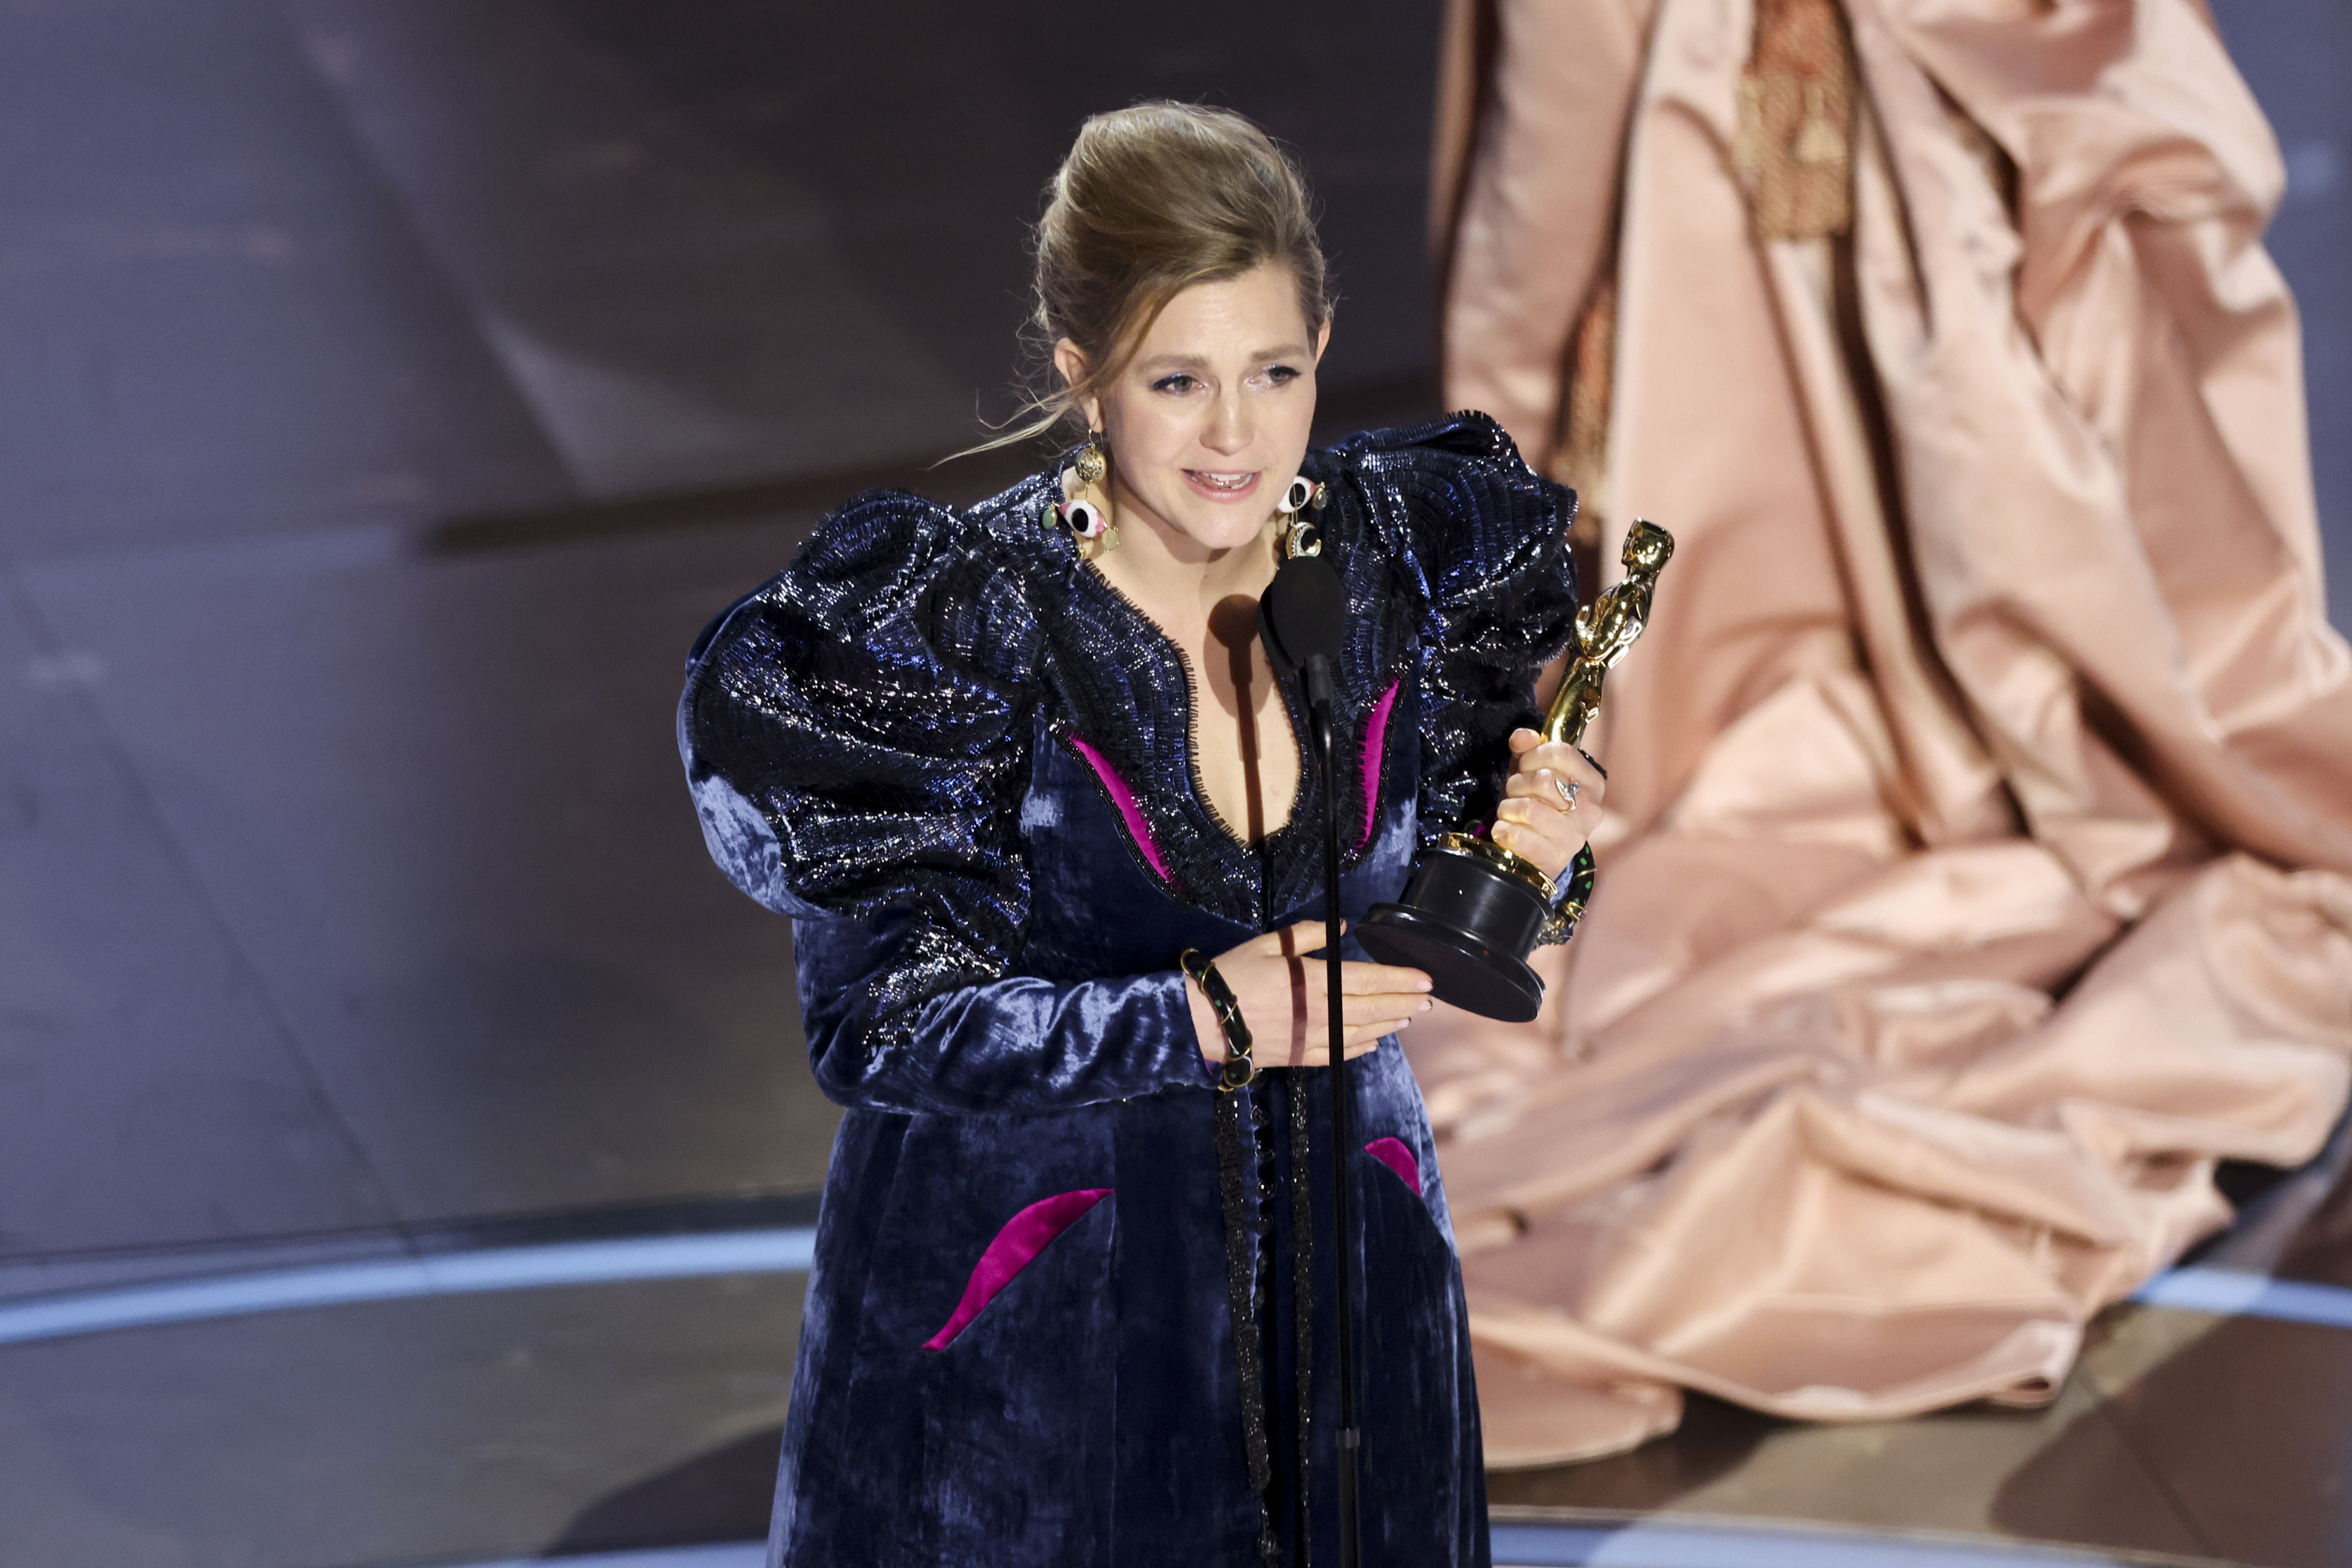 Holly Waddington in embellished outfit holding an Oscar onstage